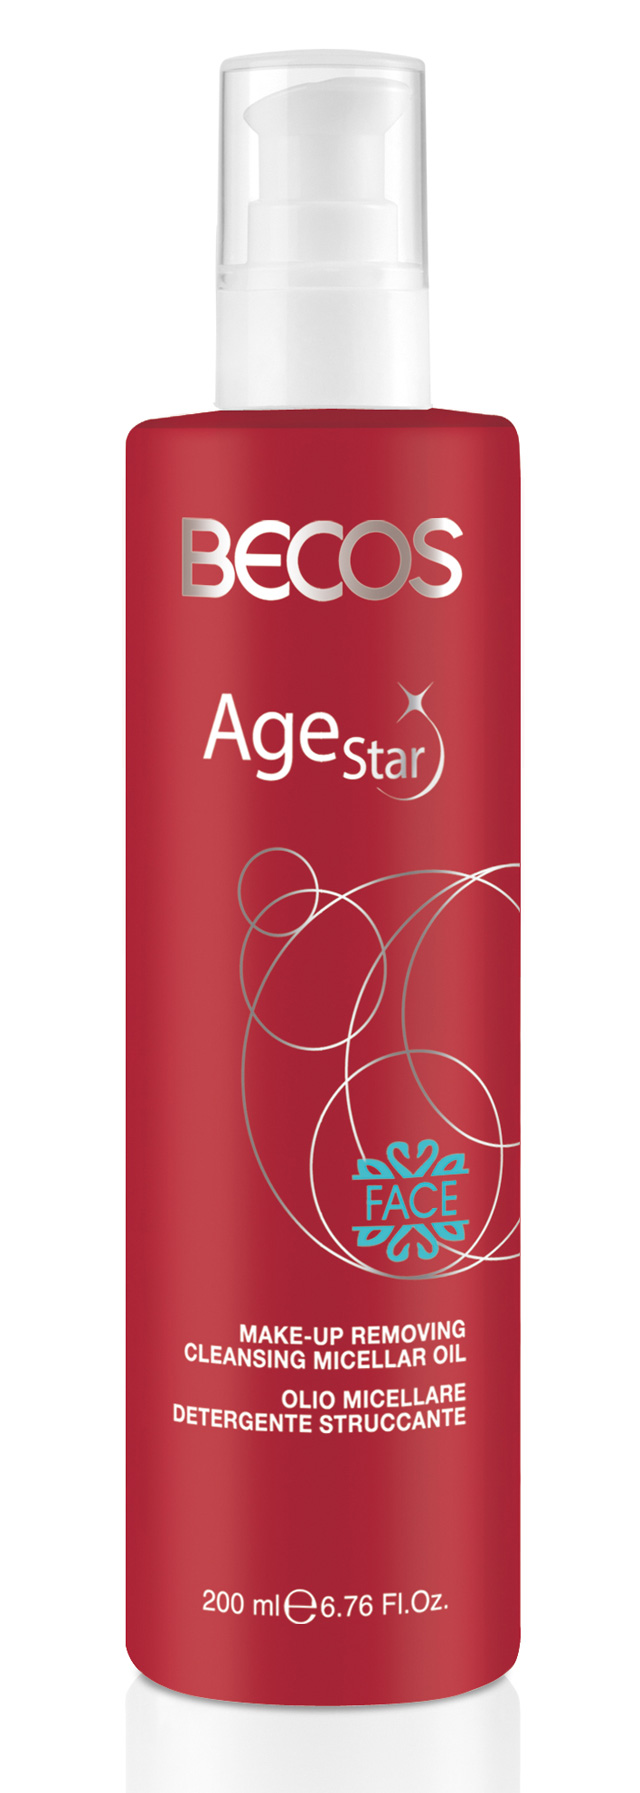 BECOS_Age Star